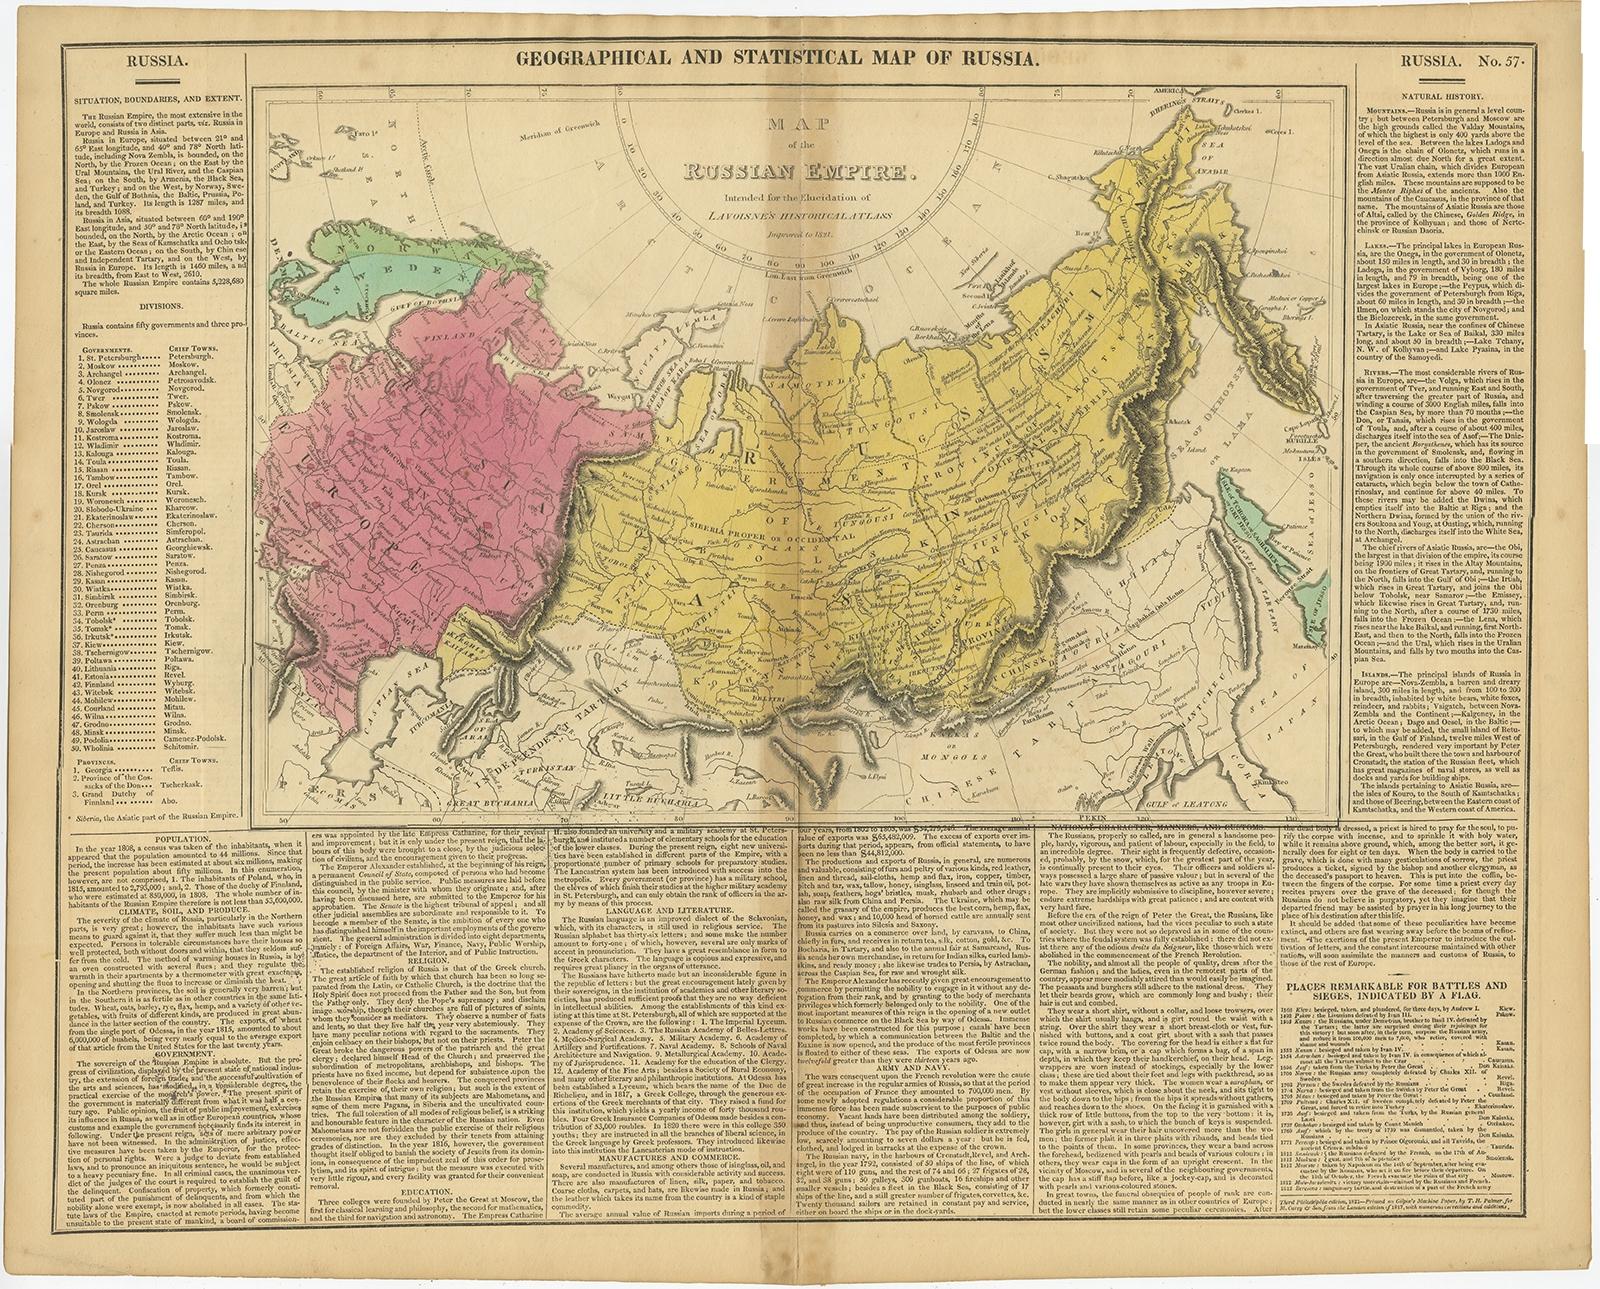 Antique map titled 'Geographical, Statistical and Historical Map of Russia'. 

Old map of the Russian Empire, encompassed on three sides by English language text. Originates from Lavoisne's 'Genealogical, Historical, Chronological & Geographical